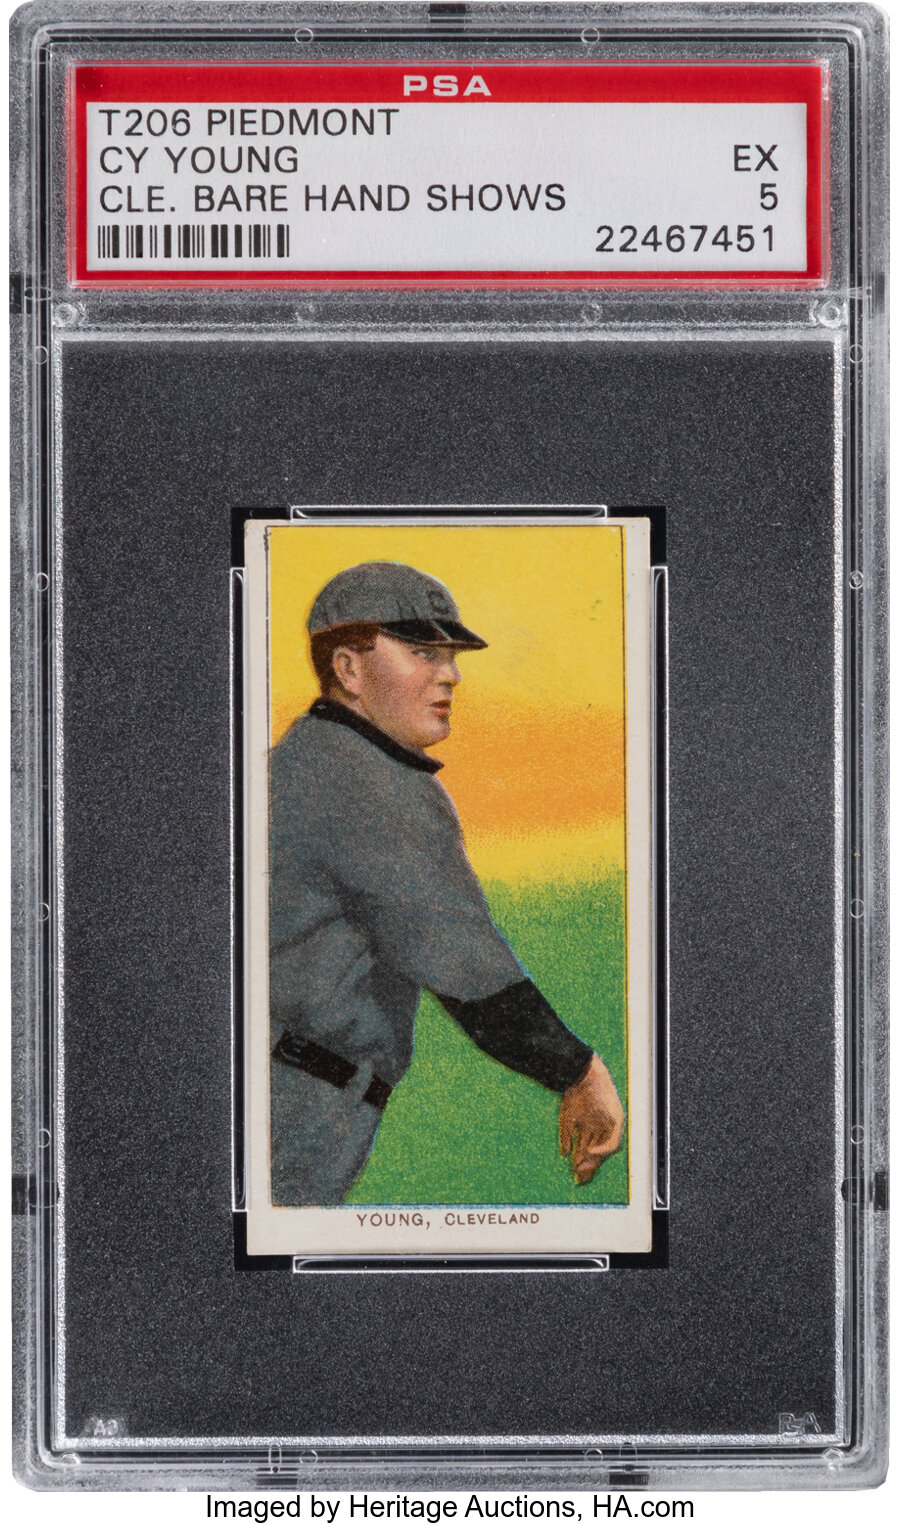 1909-11 T206 Piedmont 350 Cy Young (Bare Hand Shows) PSA EX 5 - Pop One, Five Higher with this Brand/Series